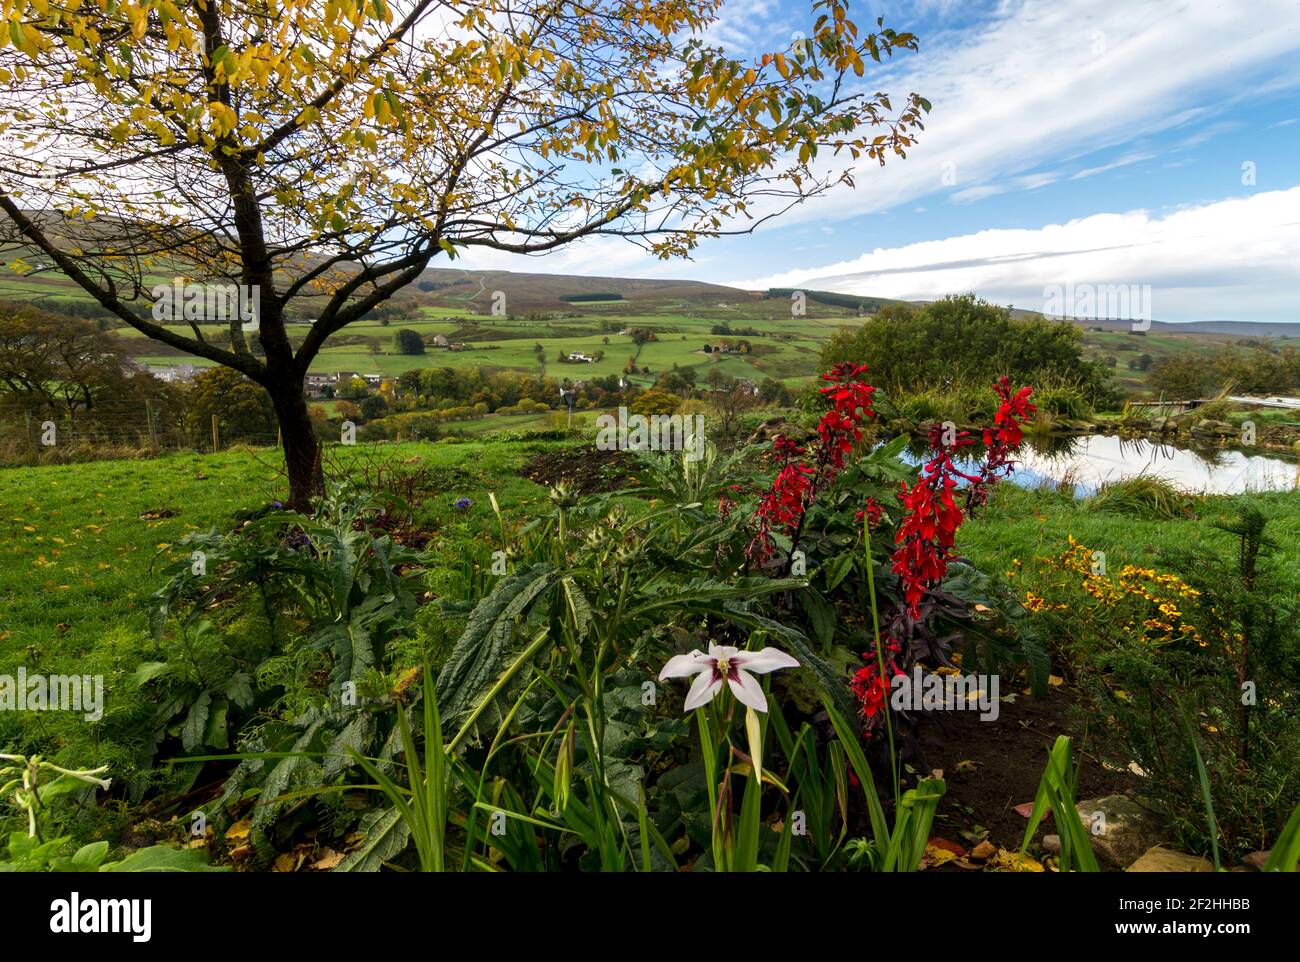 A flower bed with lobelia, a cherry tree, a pond in a country garden in the North Pennines, UK Stock Photo